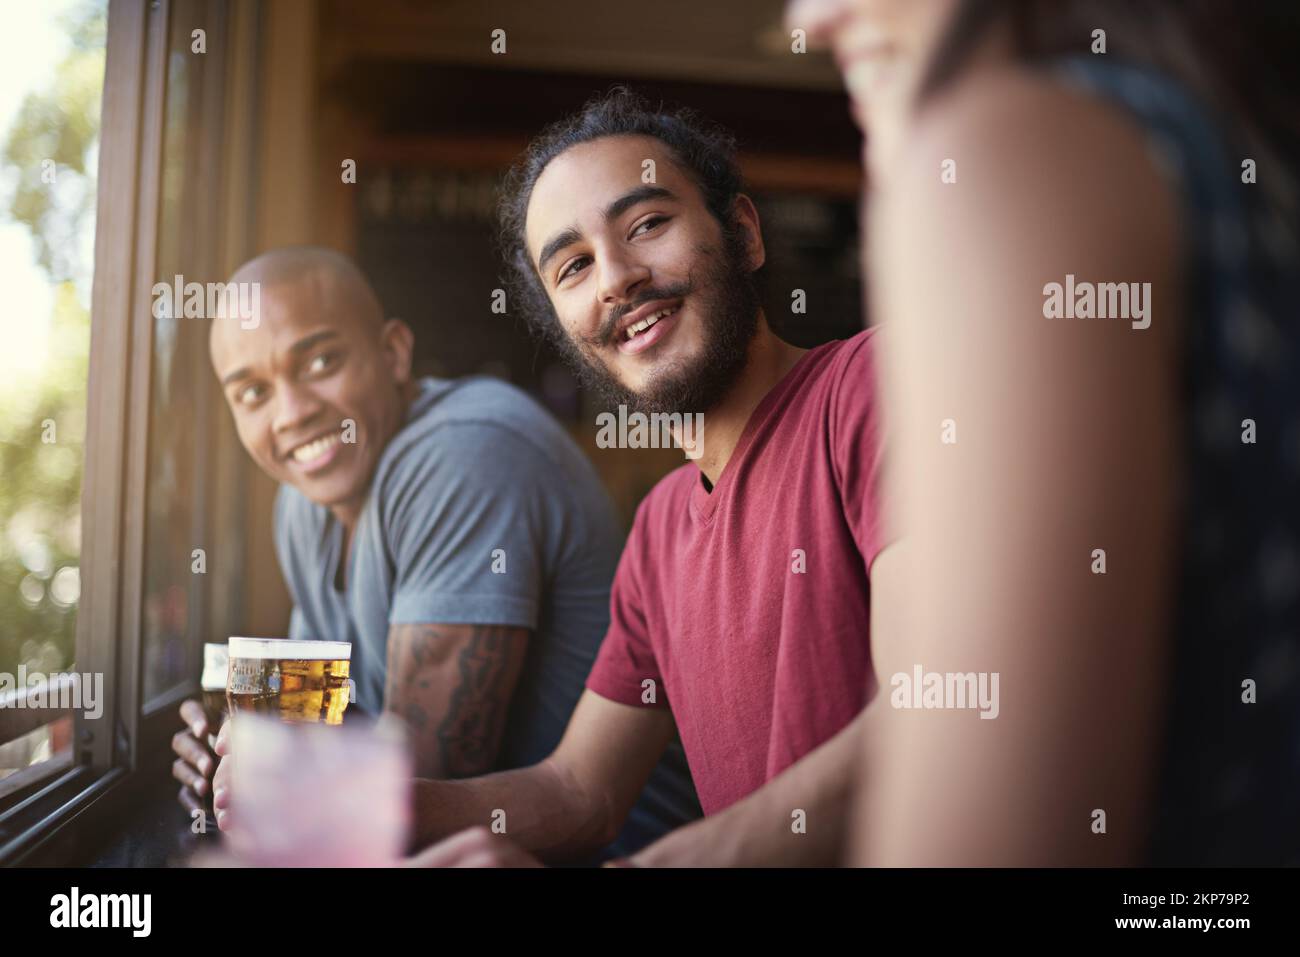 Sharing drinks and laughs. a group of friends enjoying themselves in the pub. Stock Photo